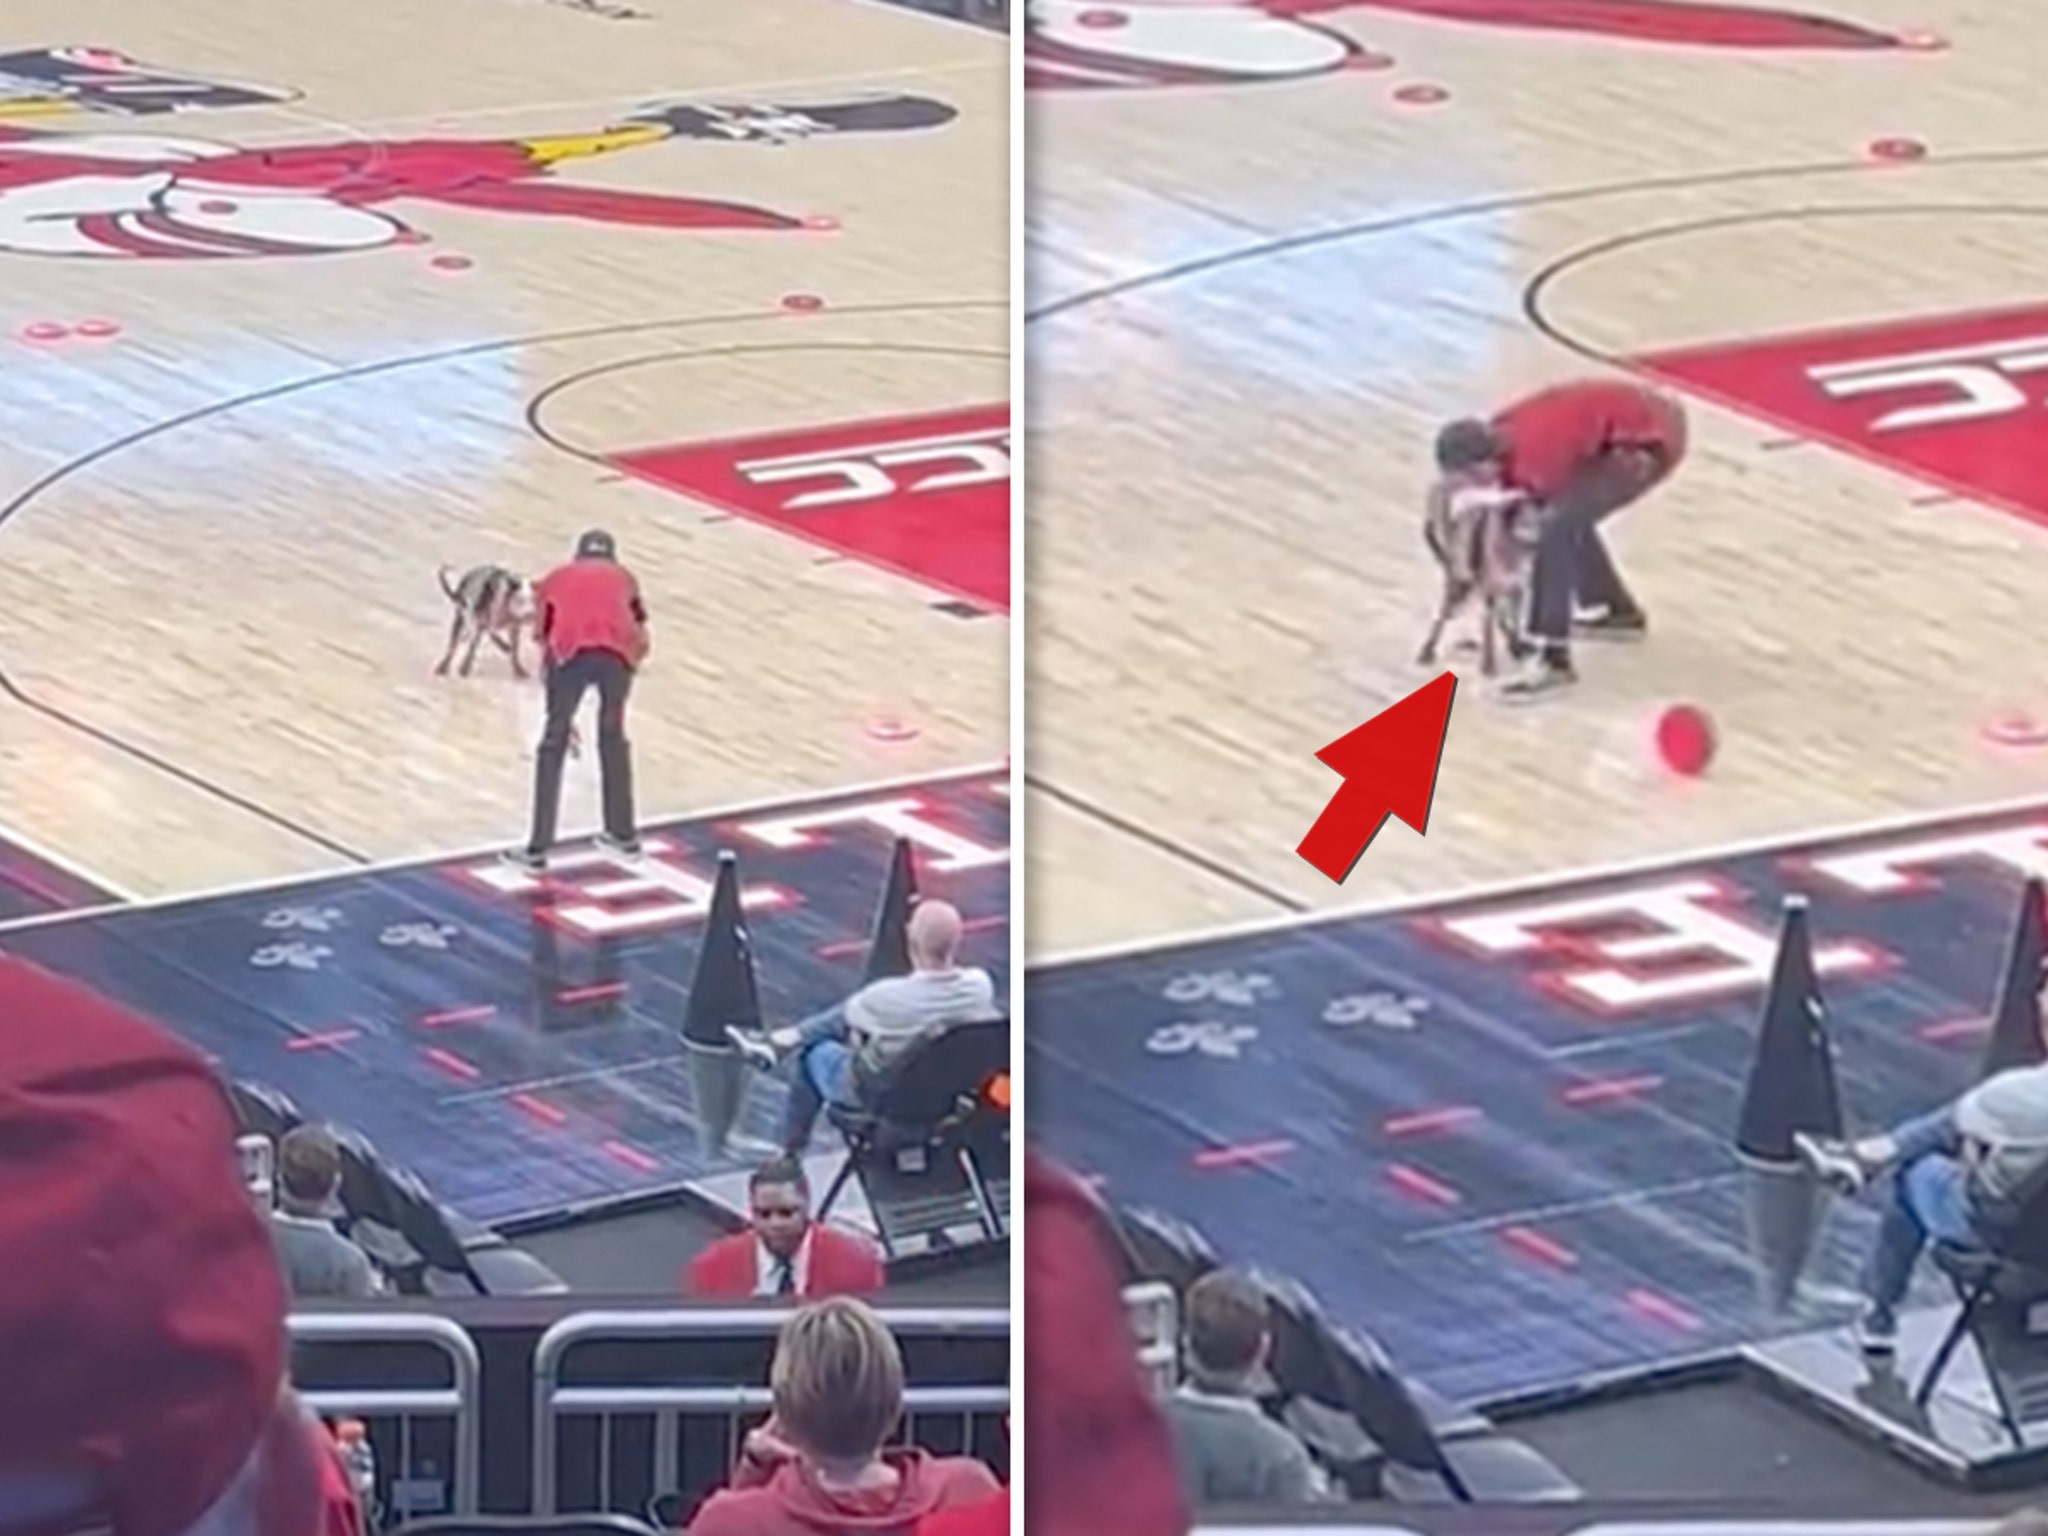 Performing Dog Poops on Court During Halftime Show at Louisville Basketball  Game